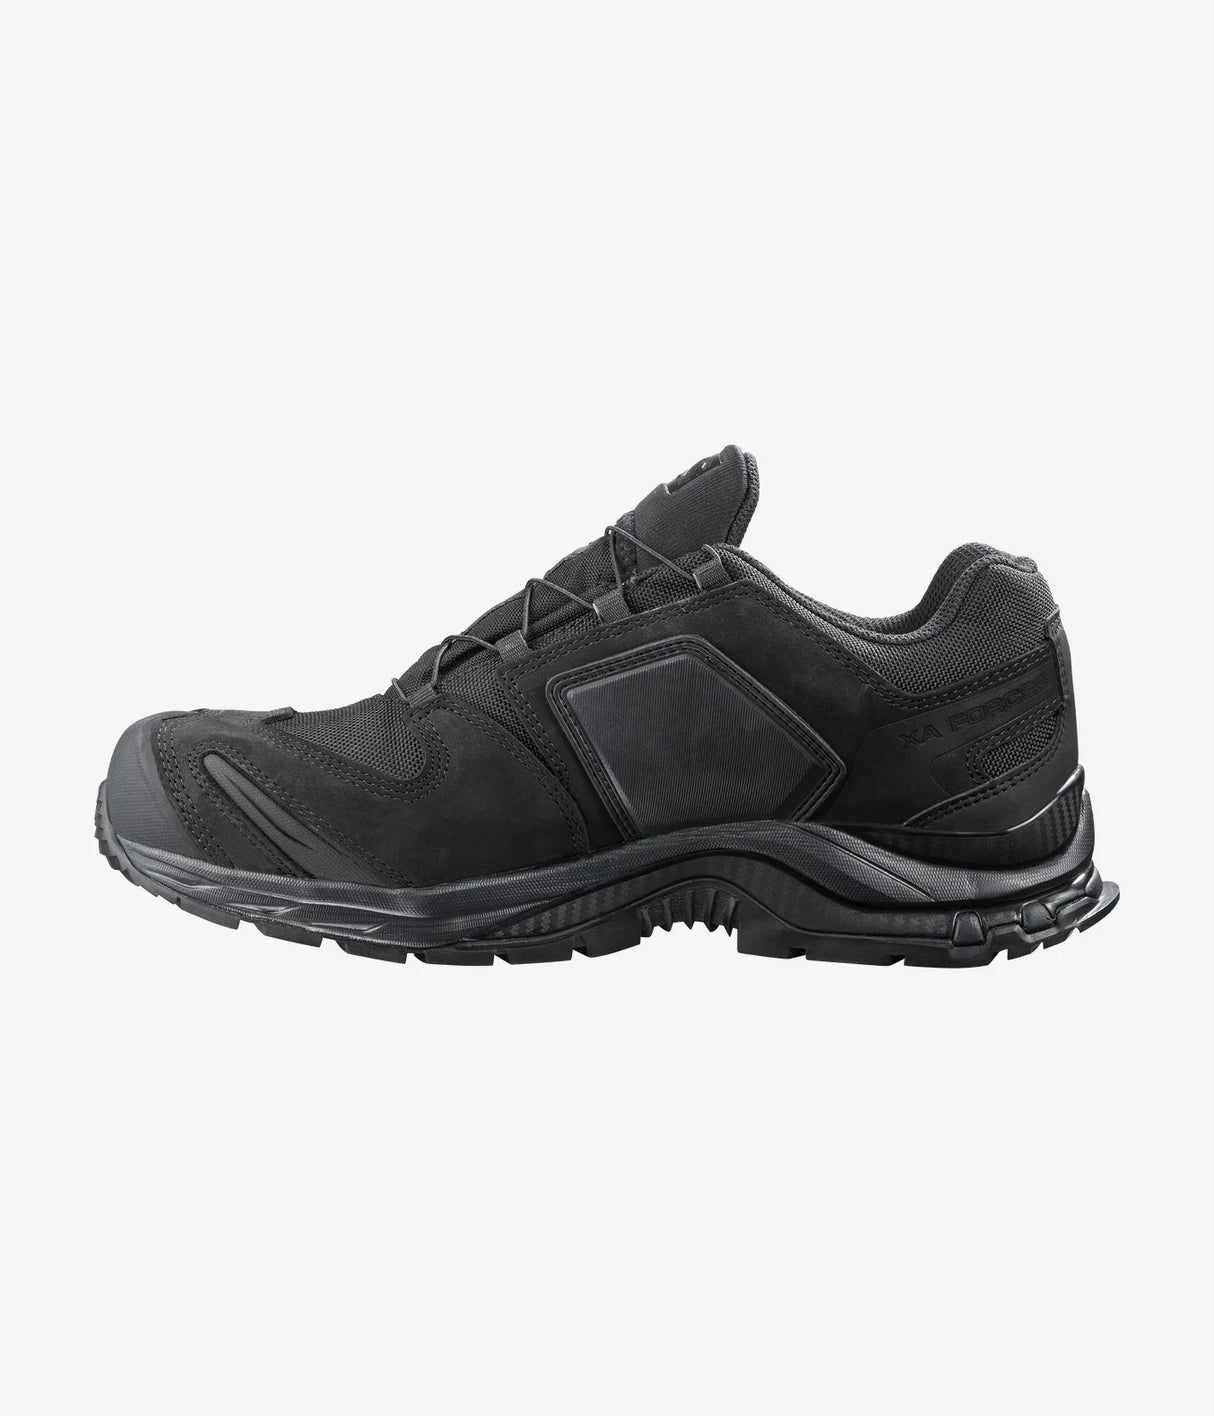 Salomon XA Forces GTX: Robust outsole for maximum stability.